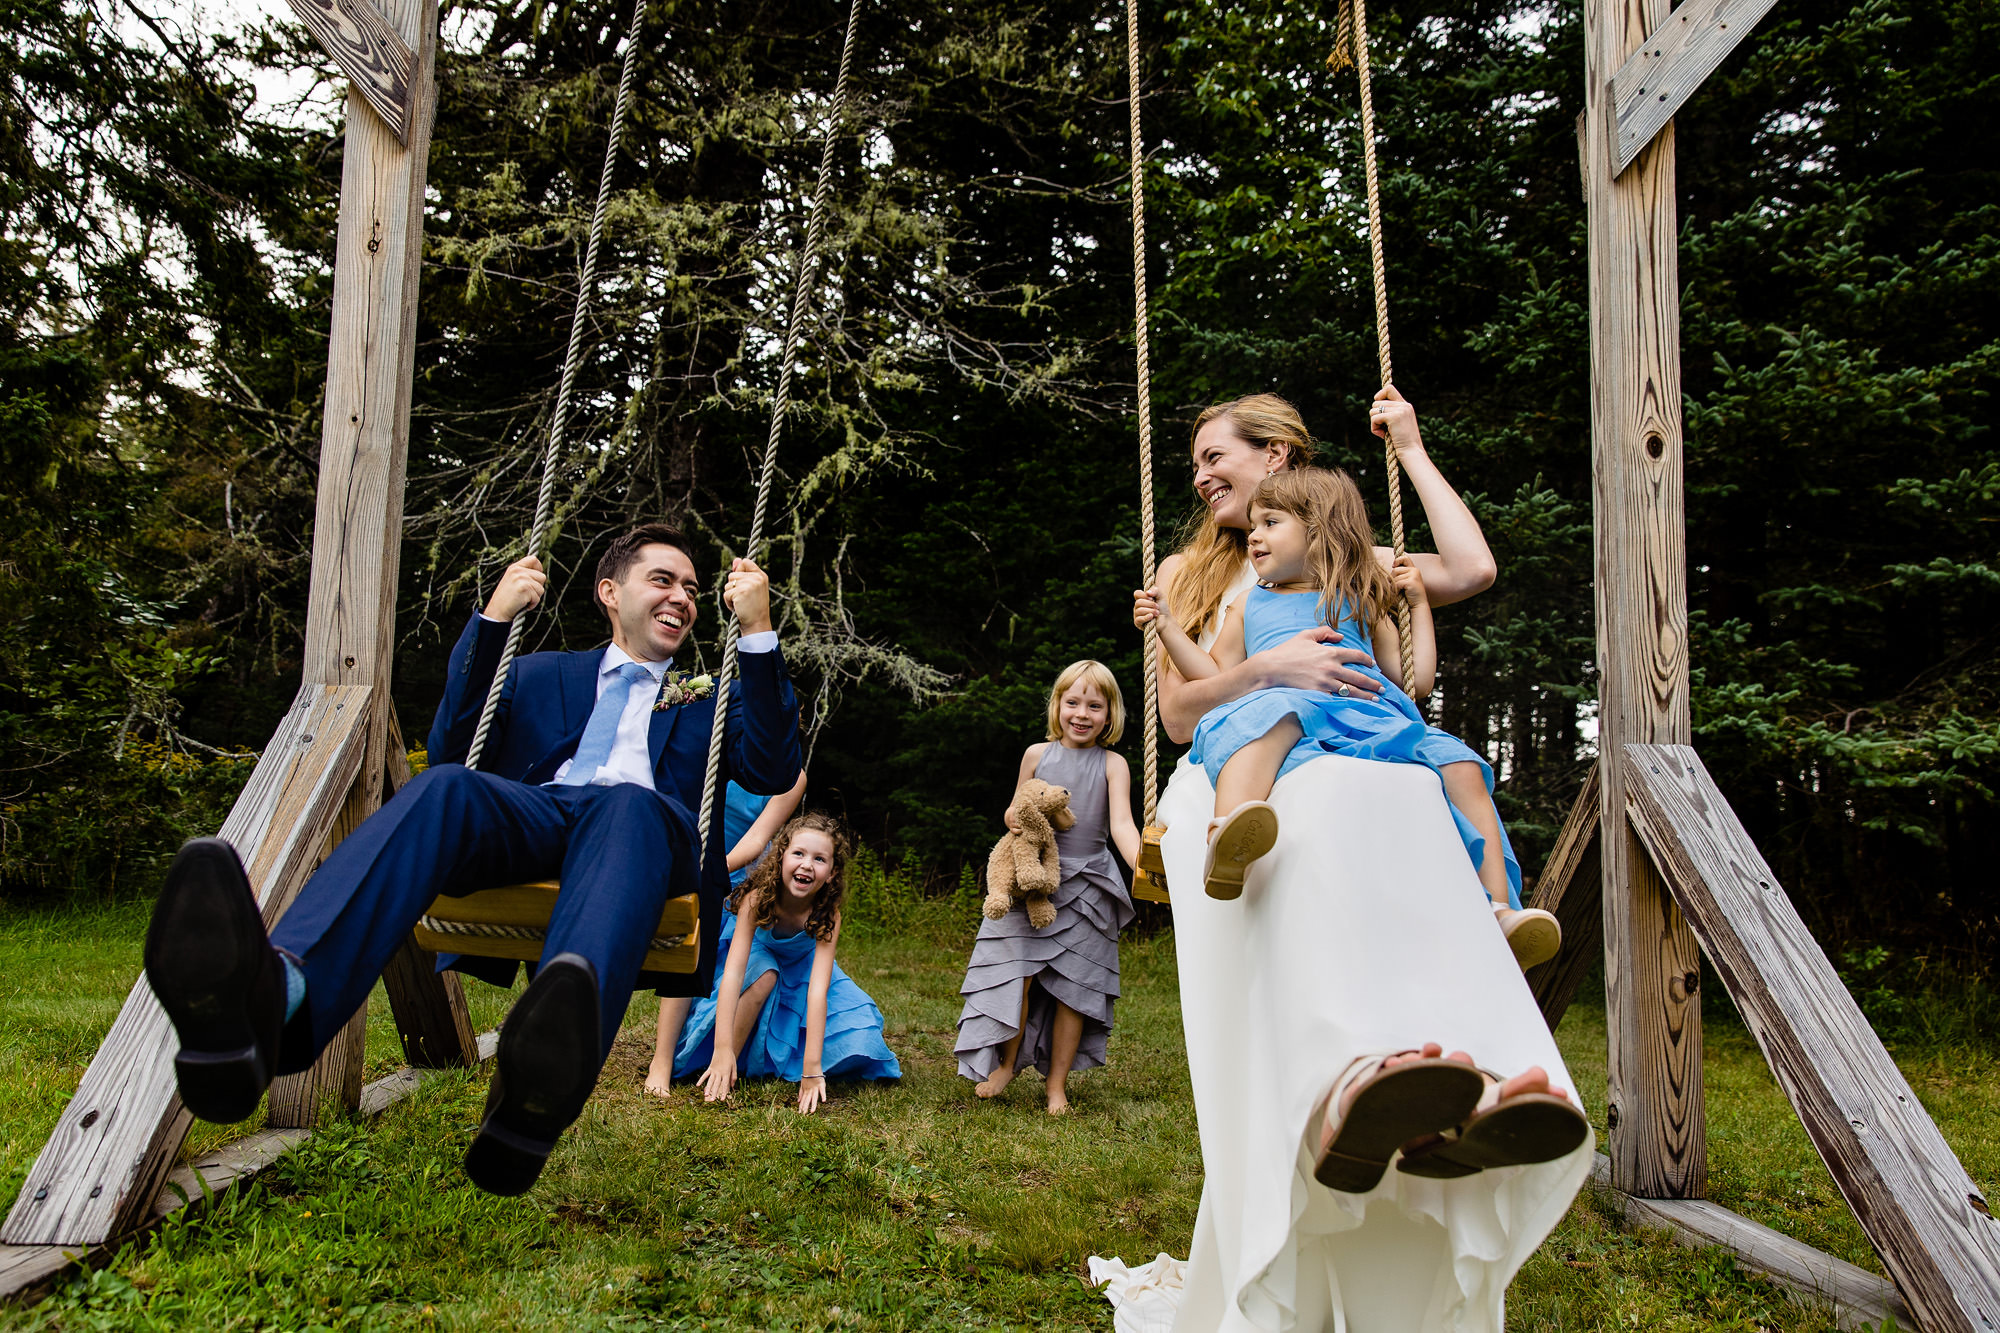 A wedding couple swing on a swing set while their flower girls push them.